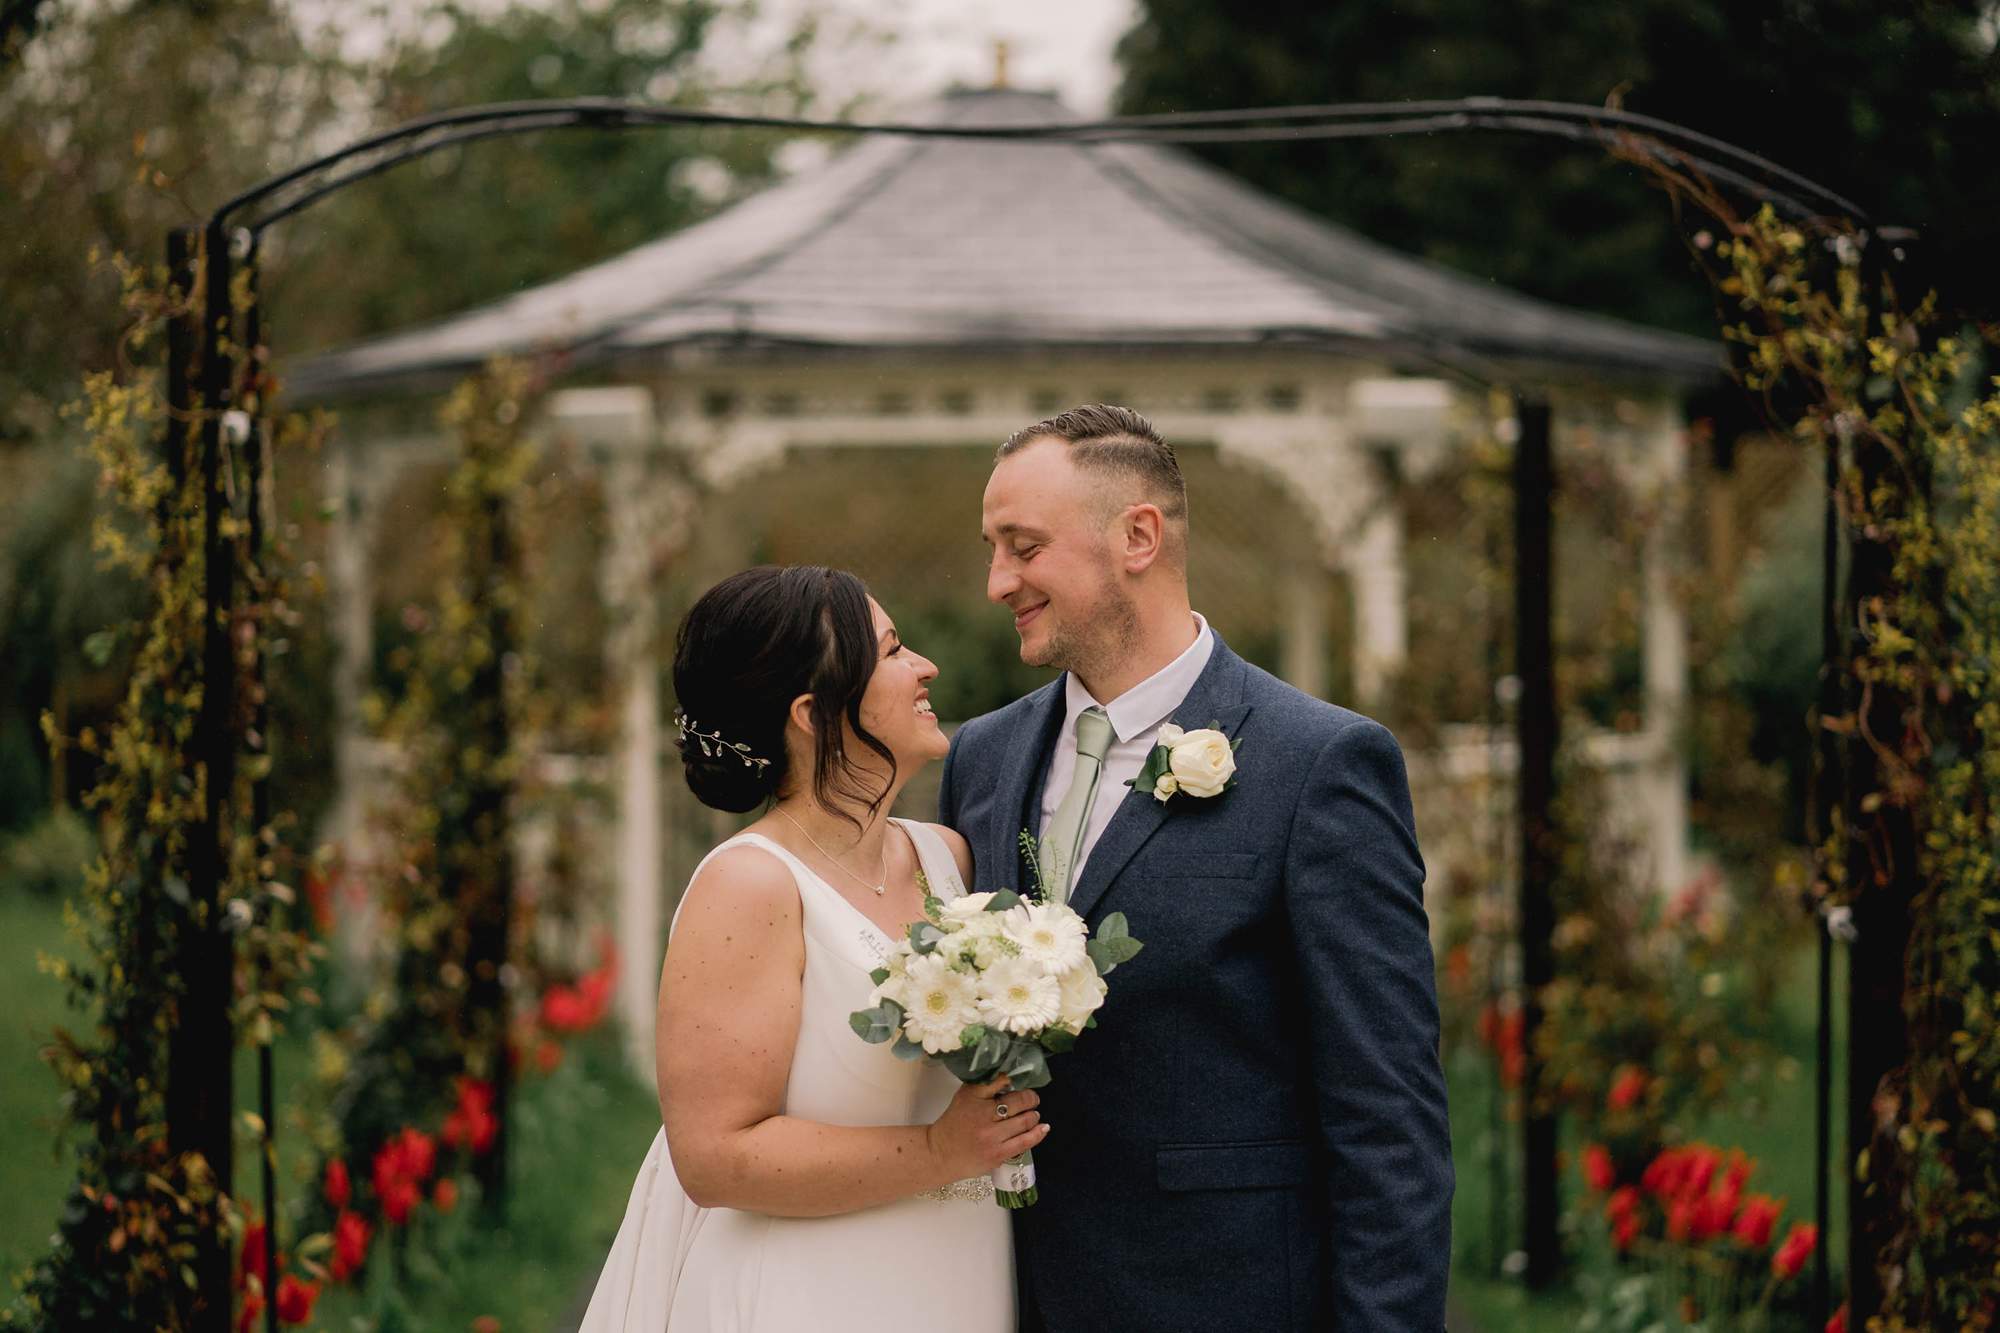 Bride and groom smiling in the gardens of Guildford manor in Surrey.